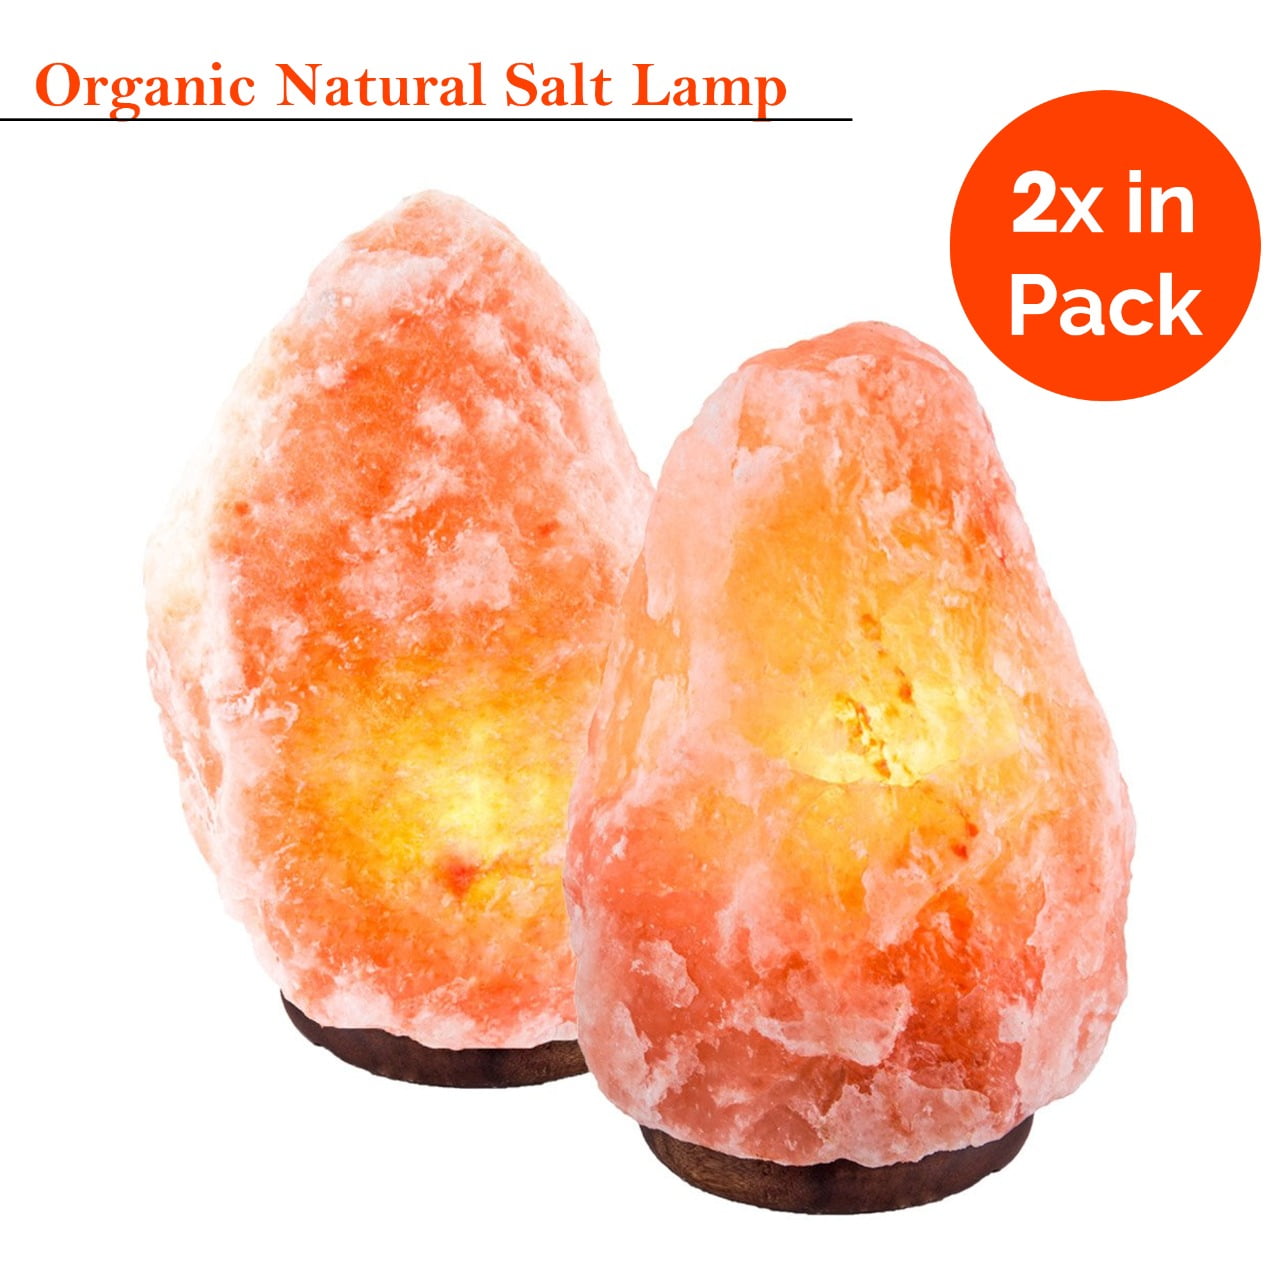 2X 5-8 Lbs 7-9 Inch Himalayan Salt Lamp with Dimmer Switch UL Cord wood base 